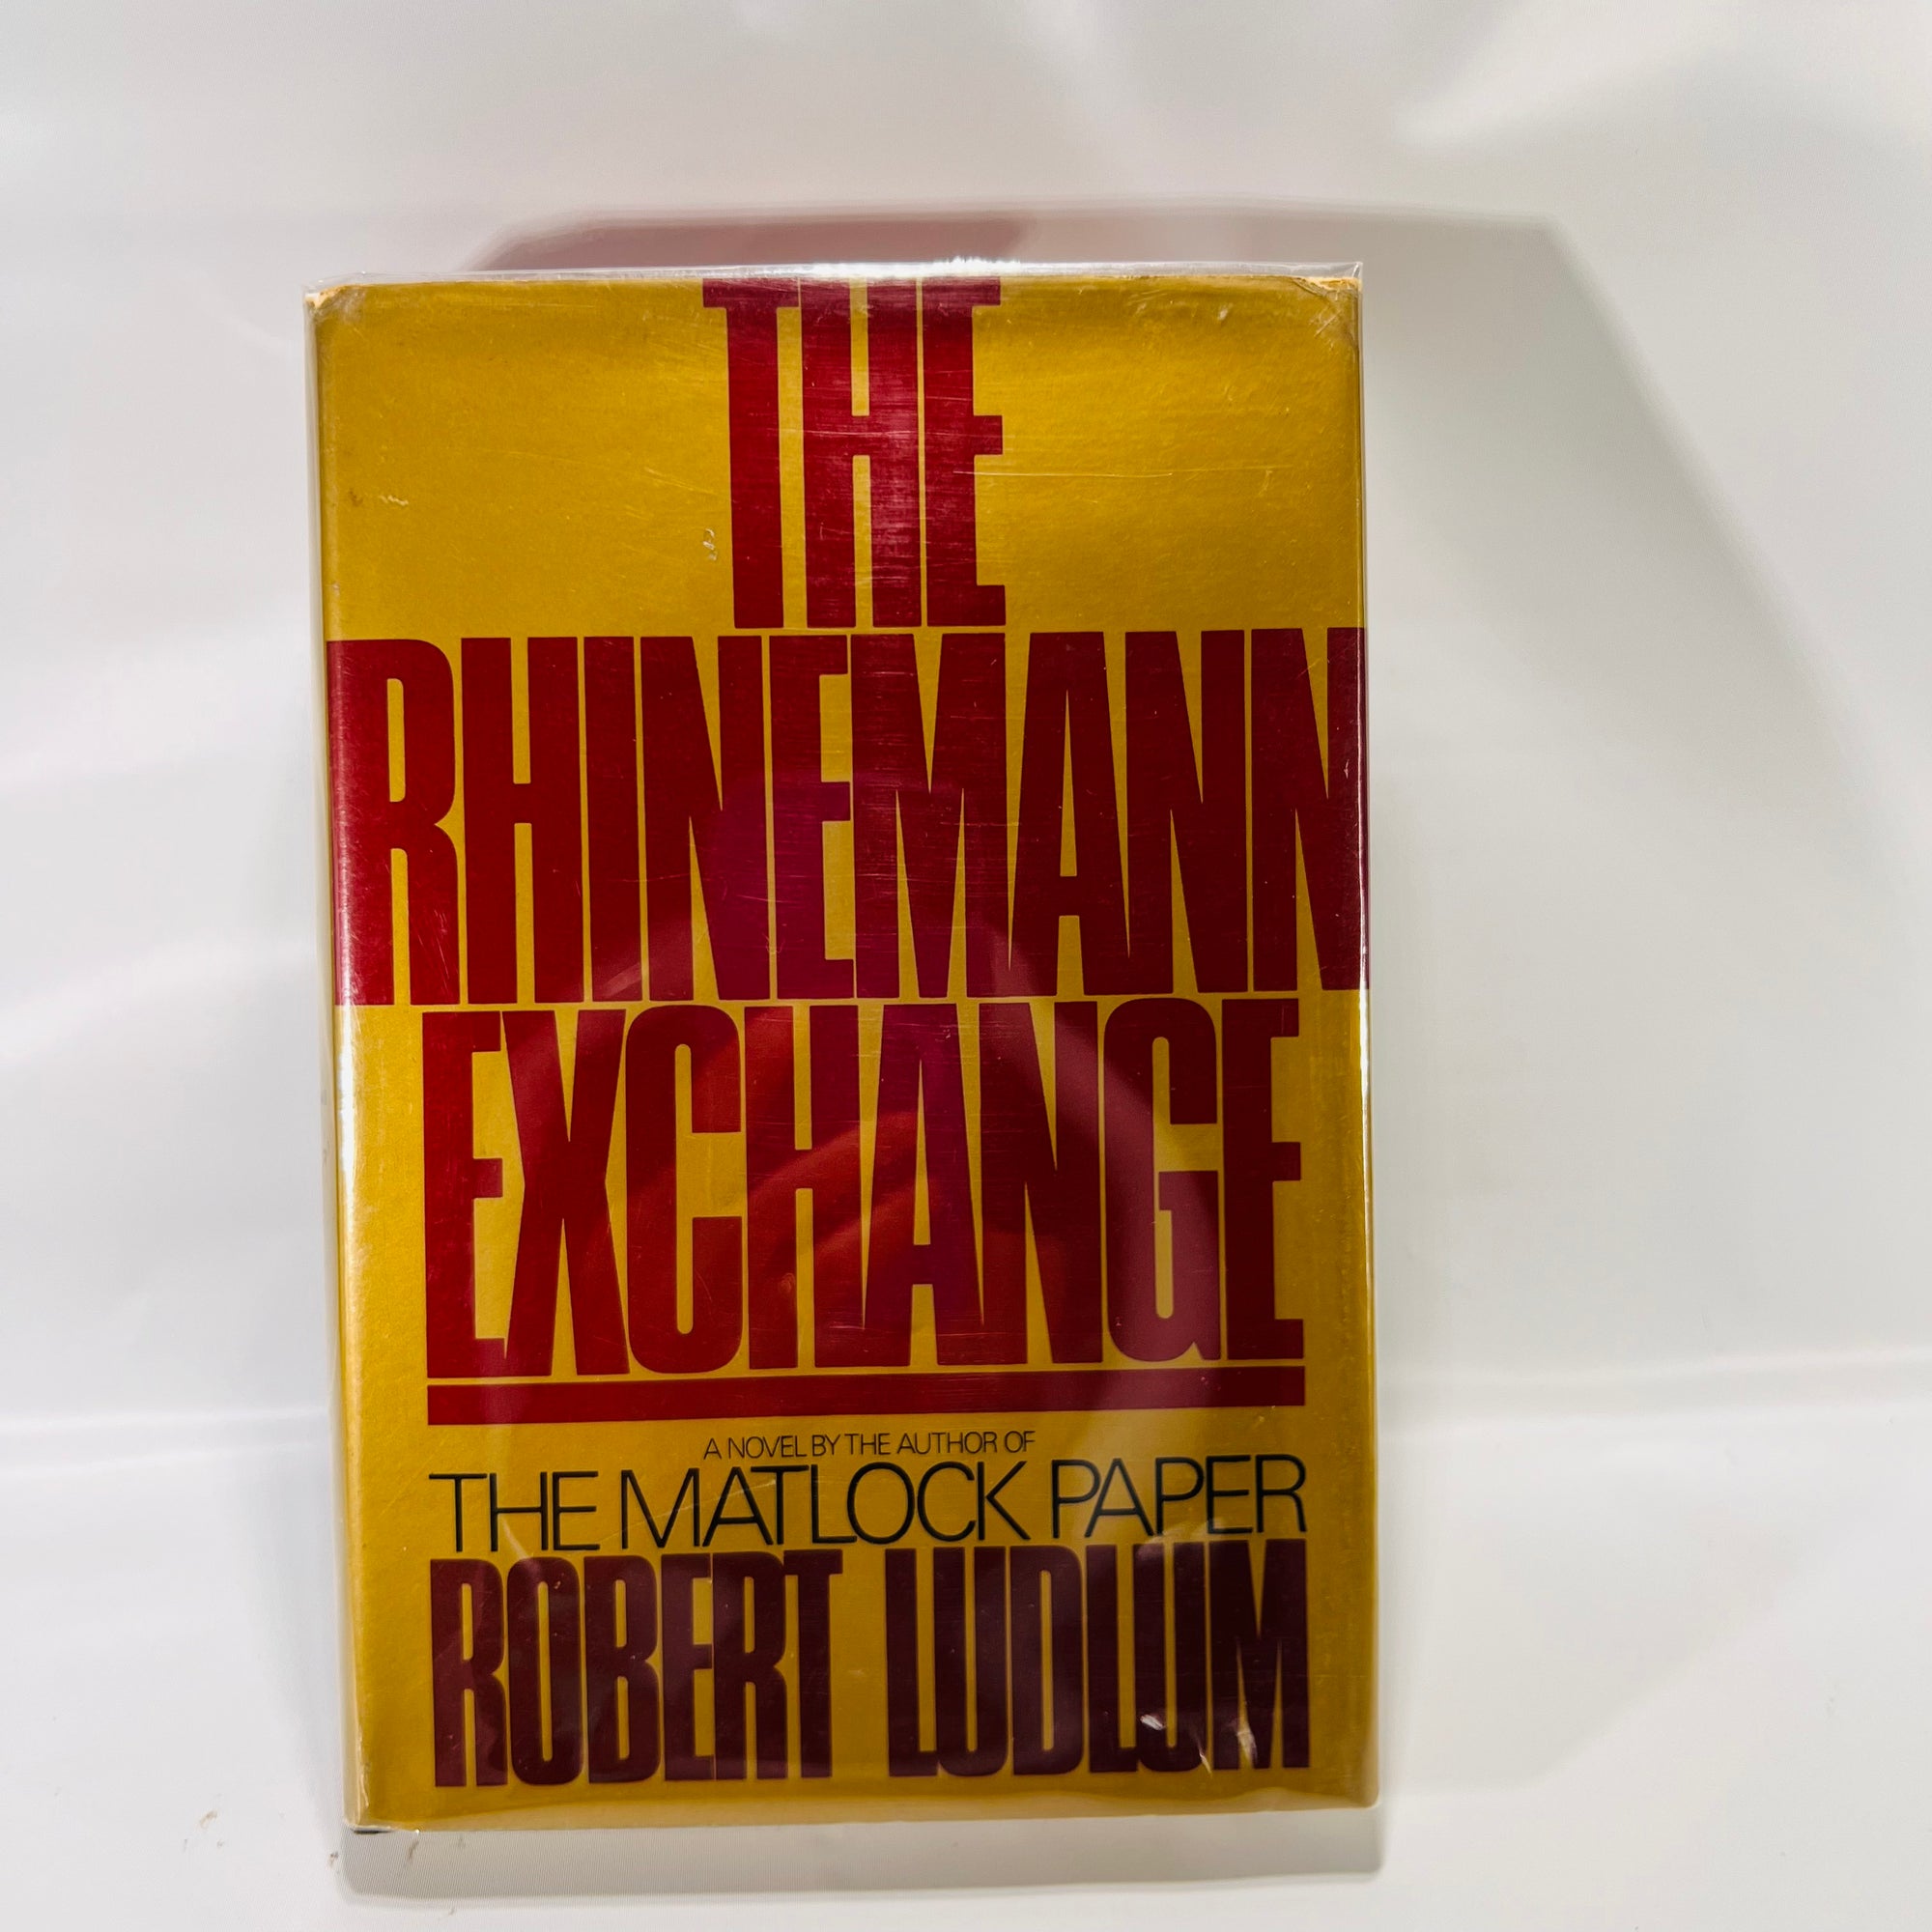 The Rhinemann Exchange by Robert Ludlum First Edition 1974 The Dial Press